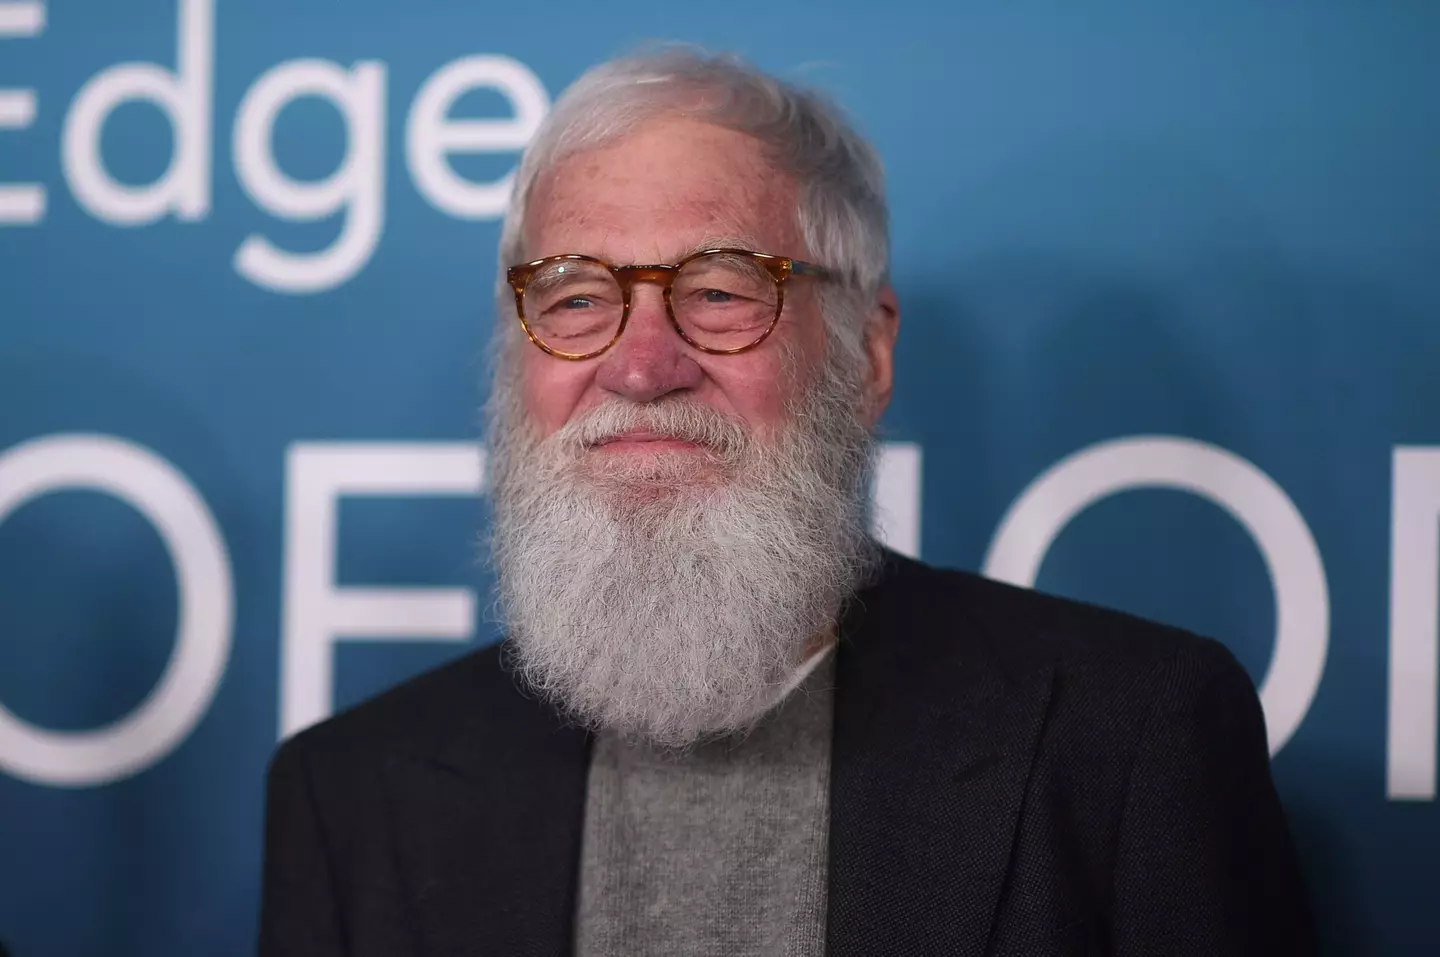 Many have slammed Letterman after witnessing the resurfaced clip.